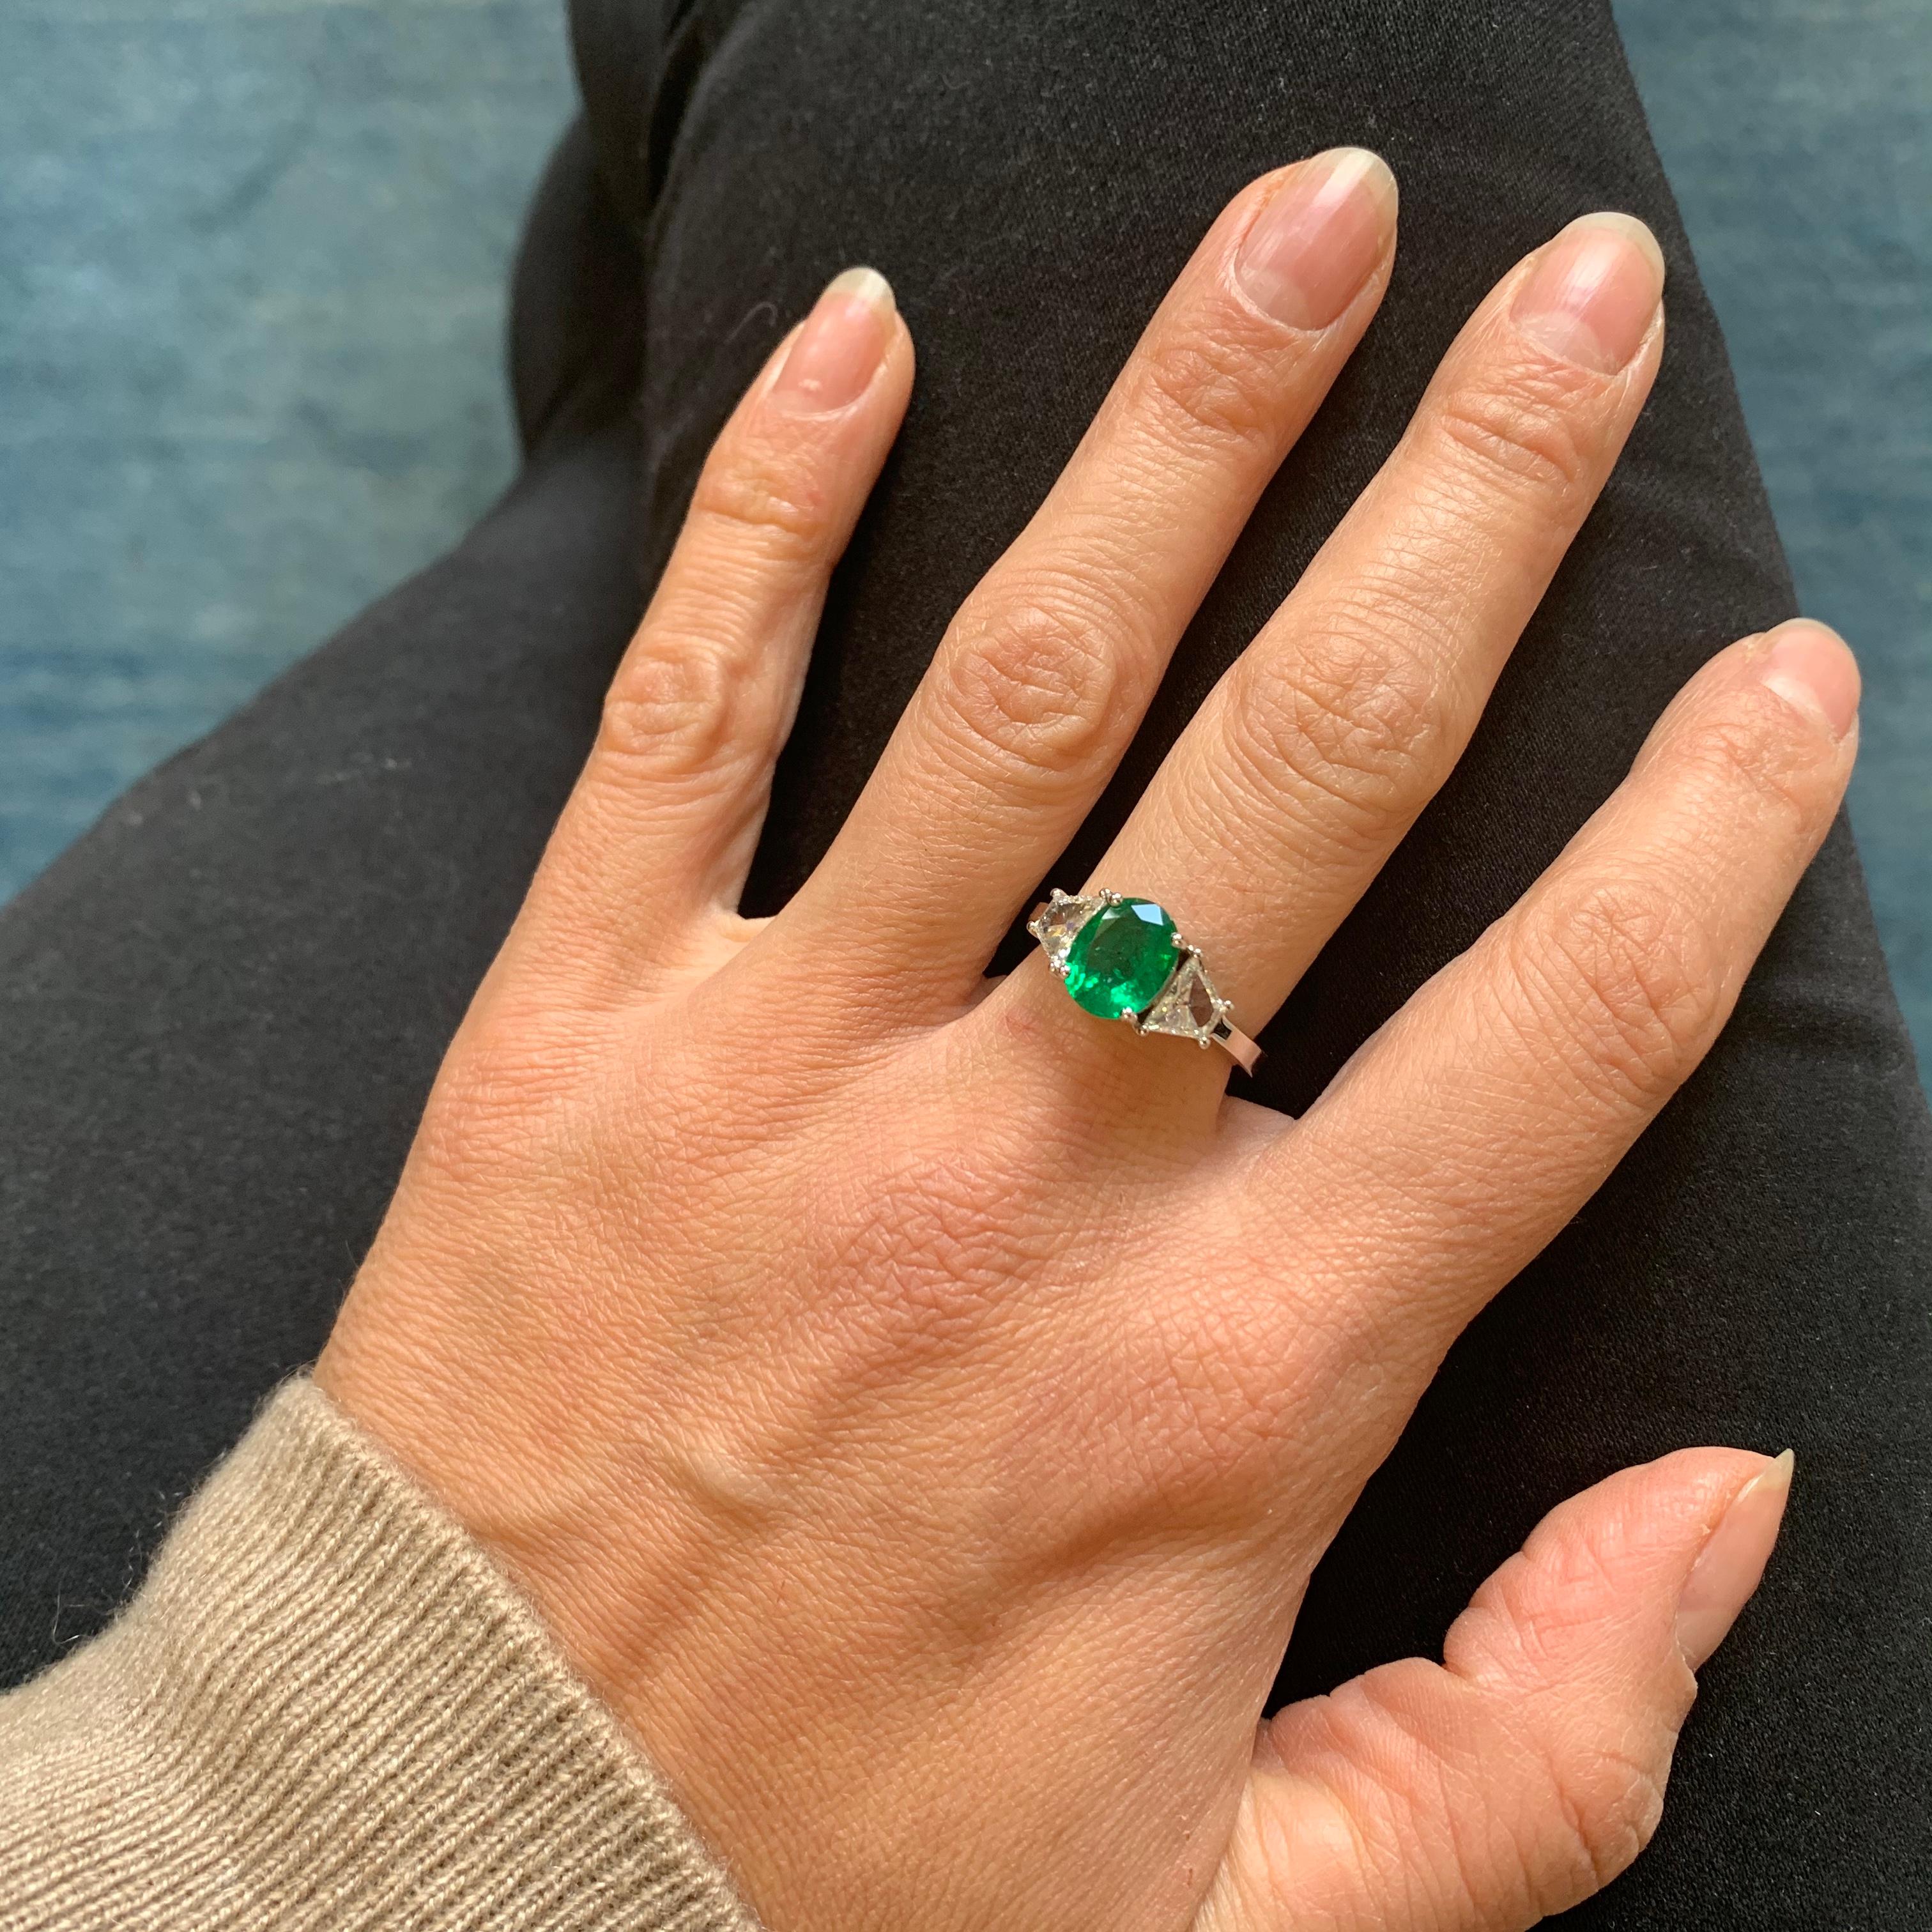 Round Cut 1.77 Carat Oval Emerald and Baguette Diamond Cocktail Ring